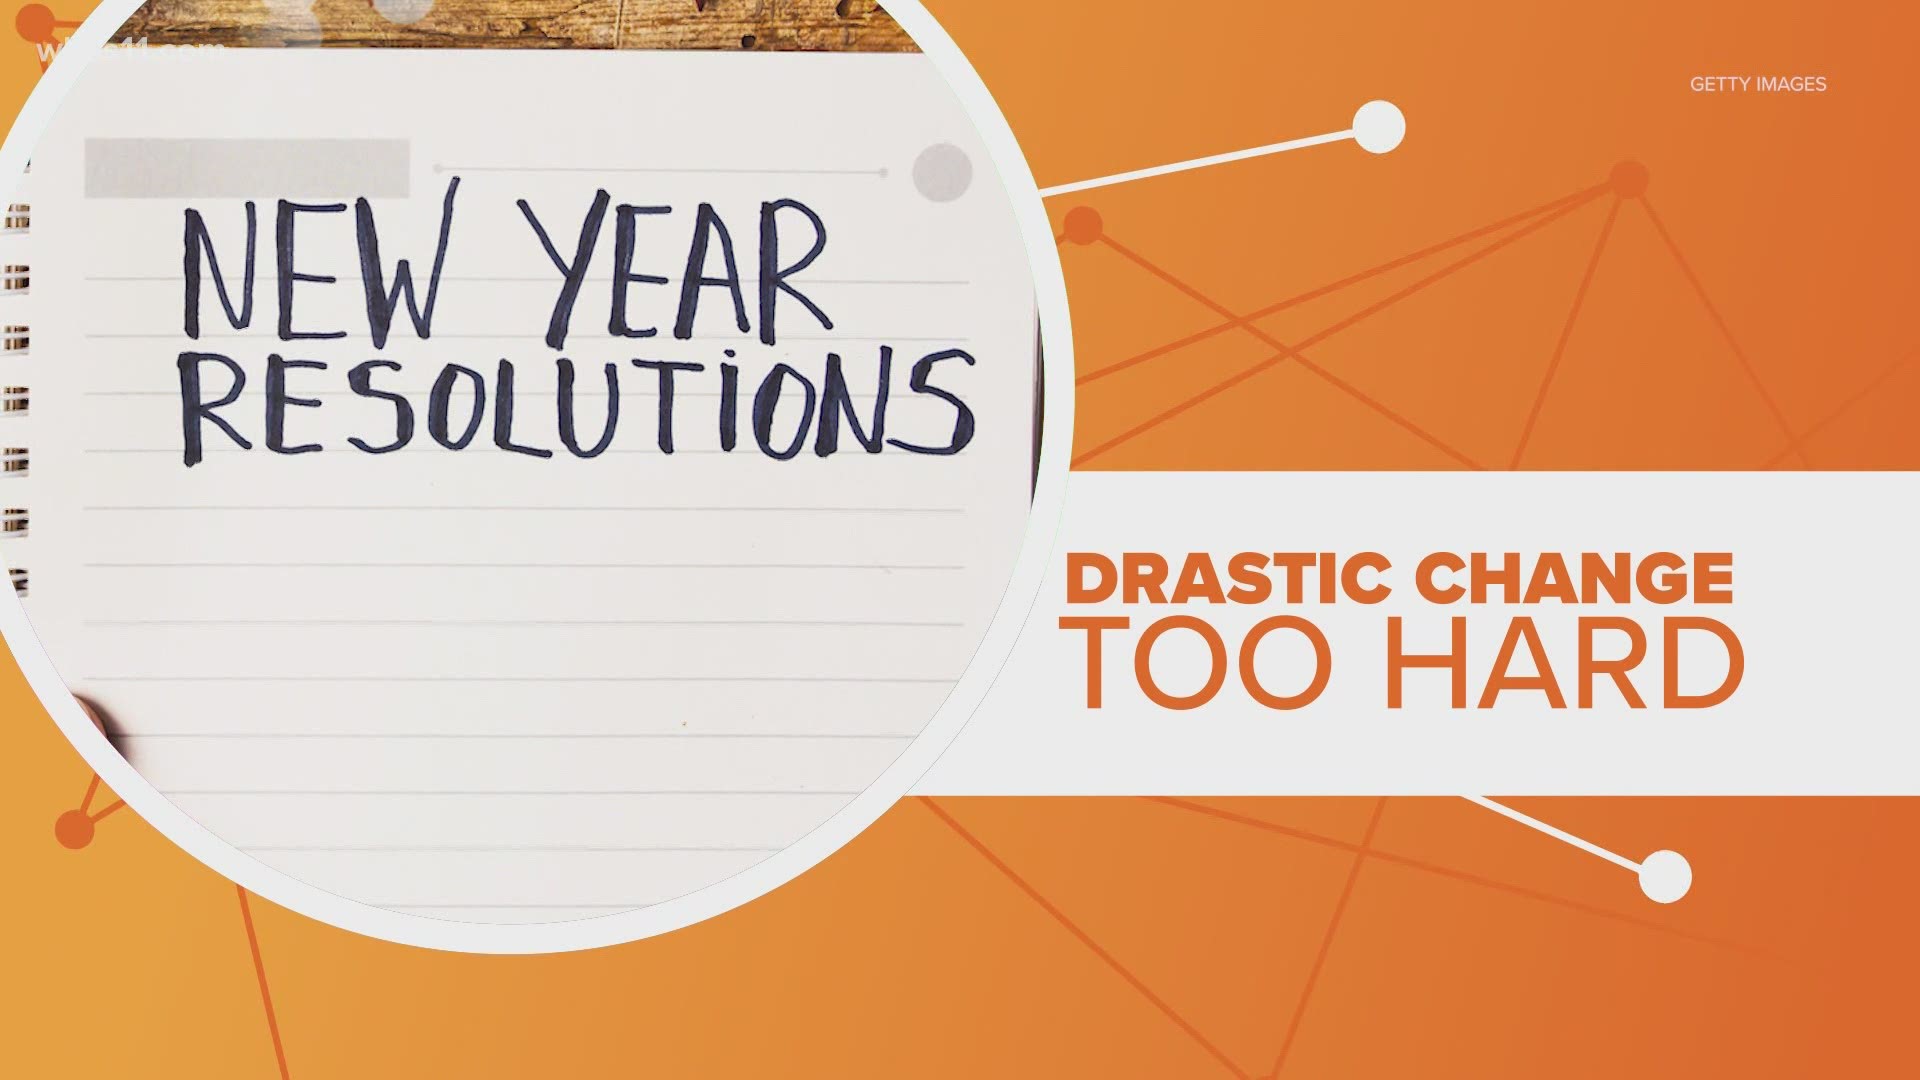 According to psychologists, one big reason we fail at keeping new year resolutions--we go too big. Here's how to have a positive outcome with your resolution.